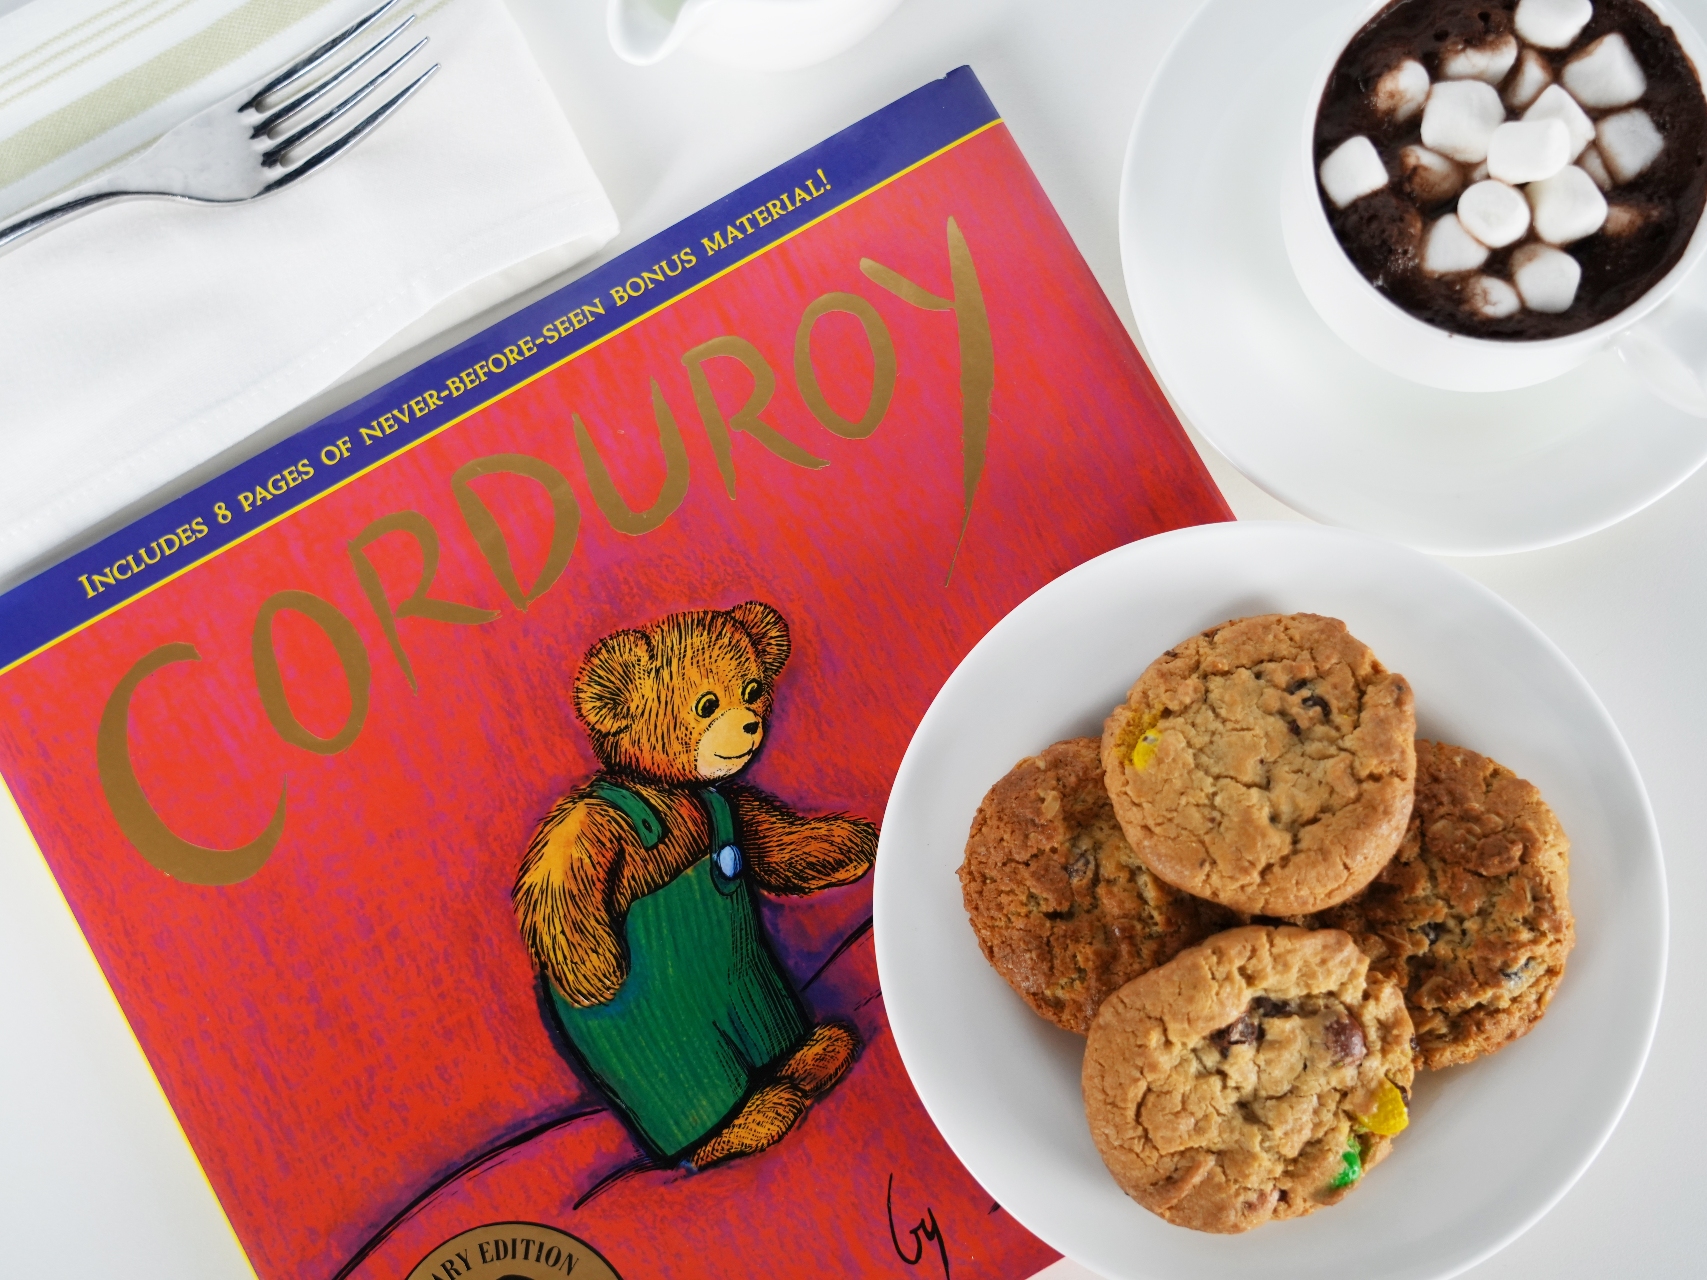 Photo of the book 'Corduroy,' a plate of cookies, and a cup of hot chocolate on a white tabletop.